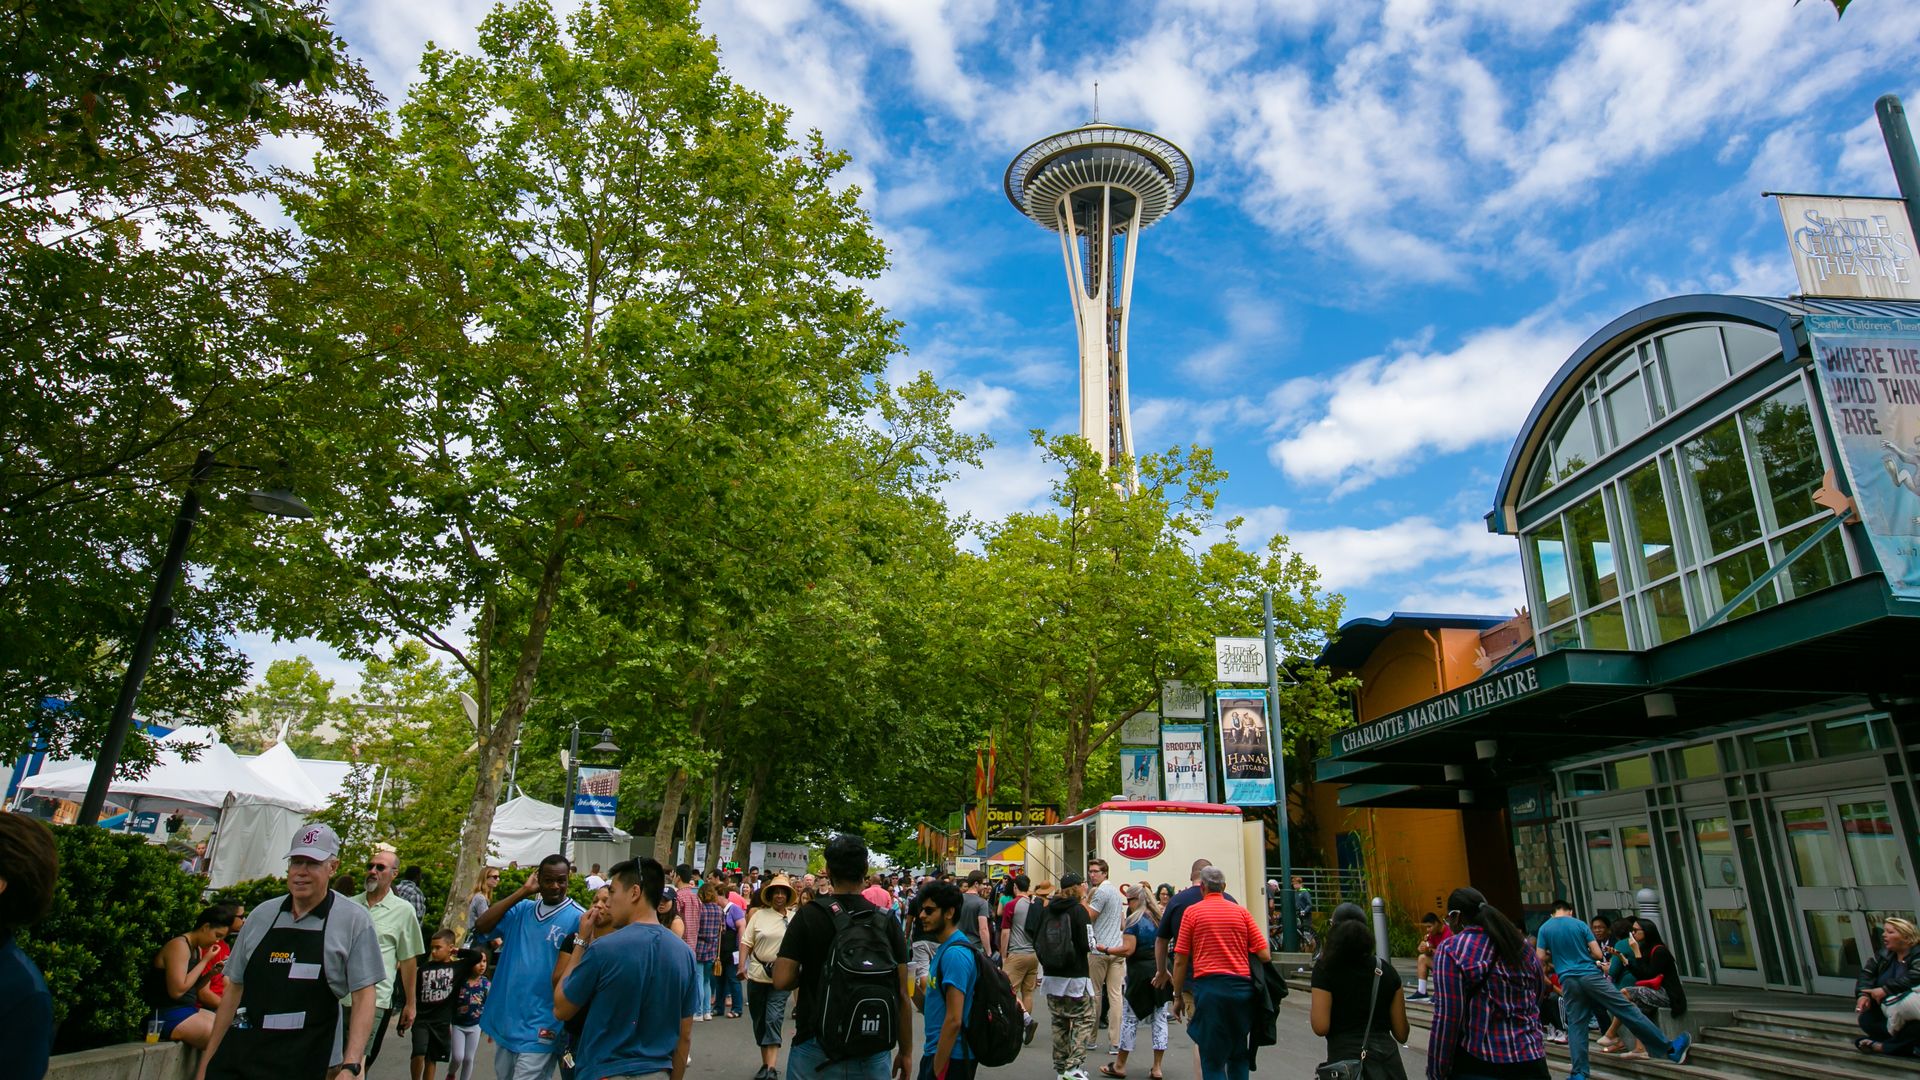 The Space Needle is shown over a crowd of people at Seattle Center, with blue skies punctuated by only a few clouds.